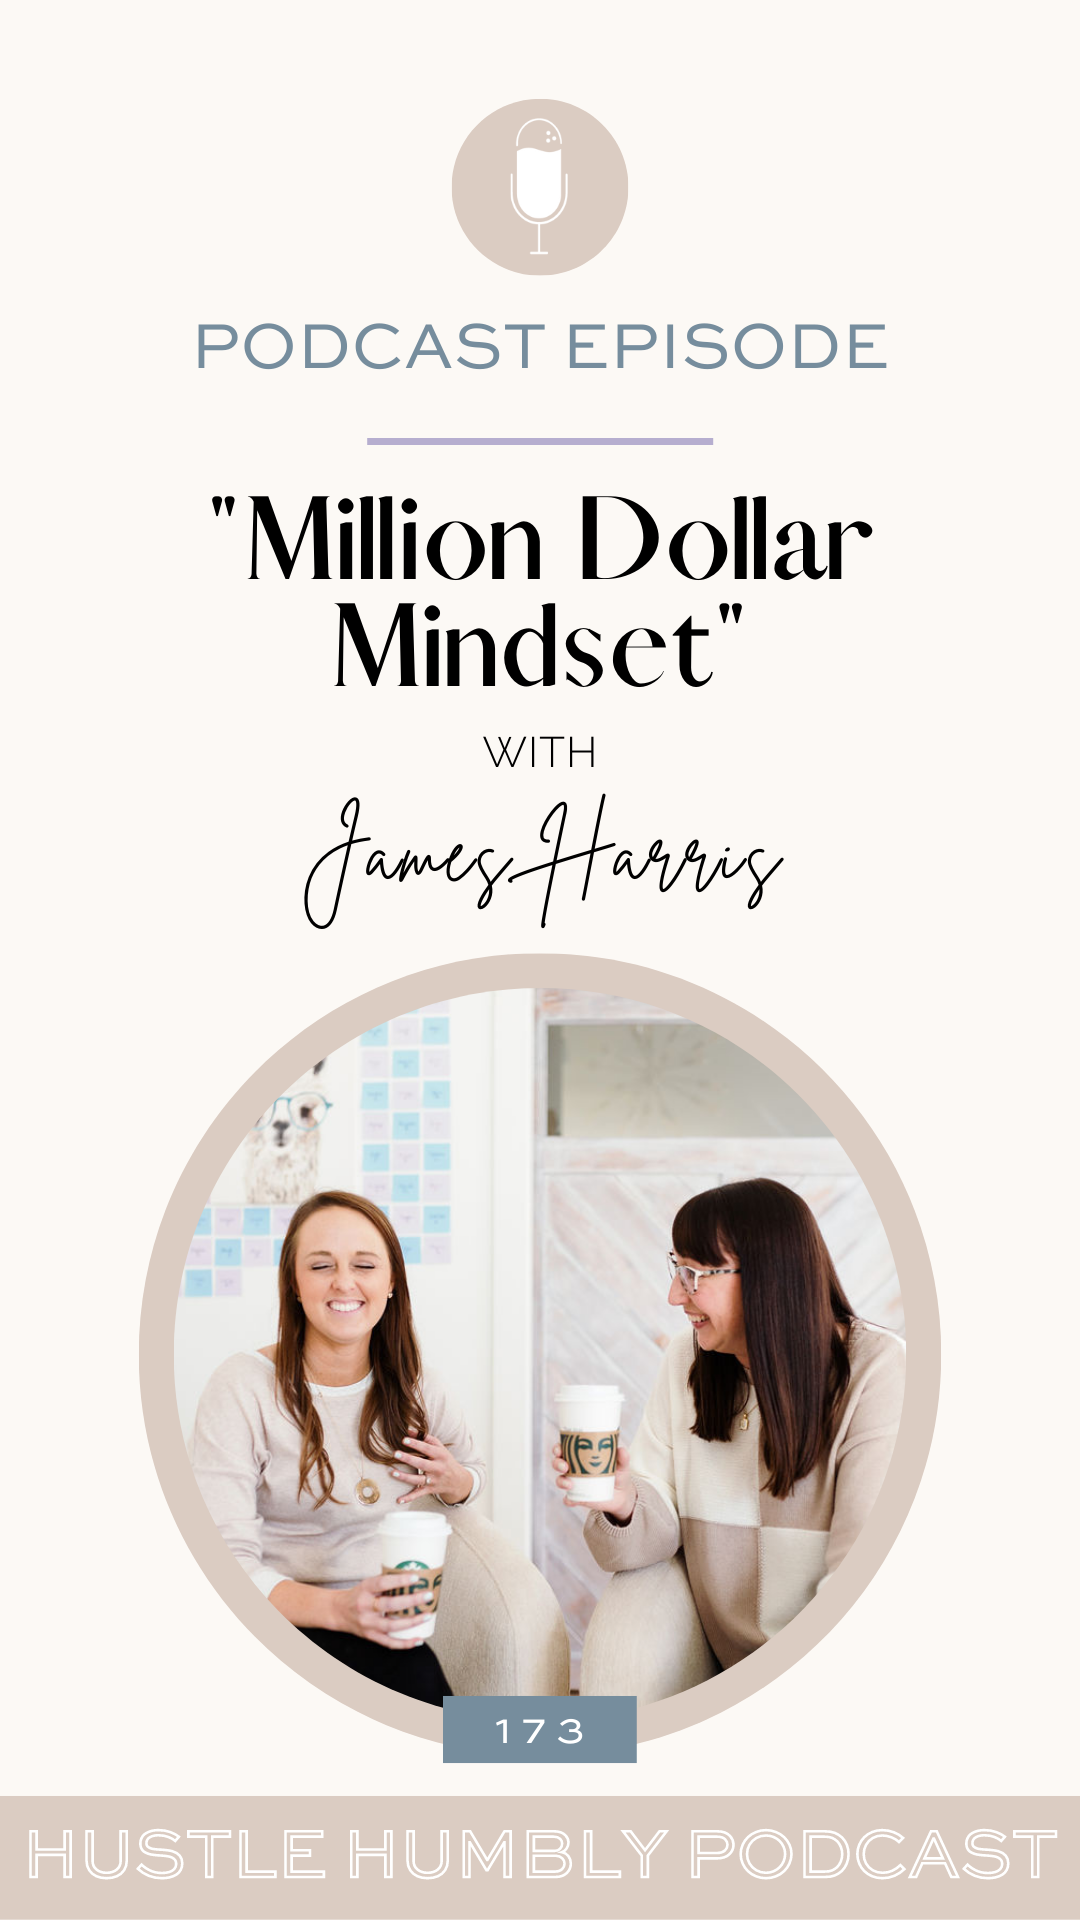 Hustle Humbly Podcast Katy and Alissa interview guest James Harris, Million Dollar Listing LA